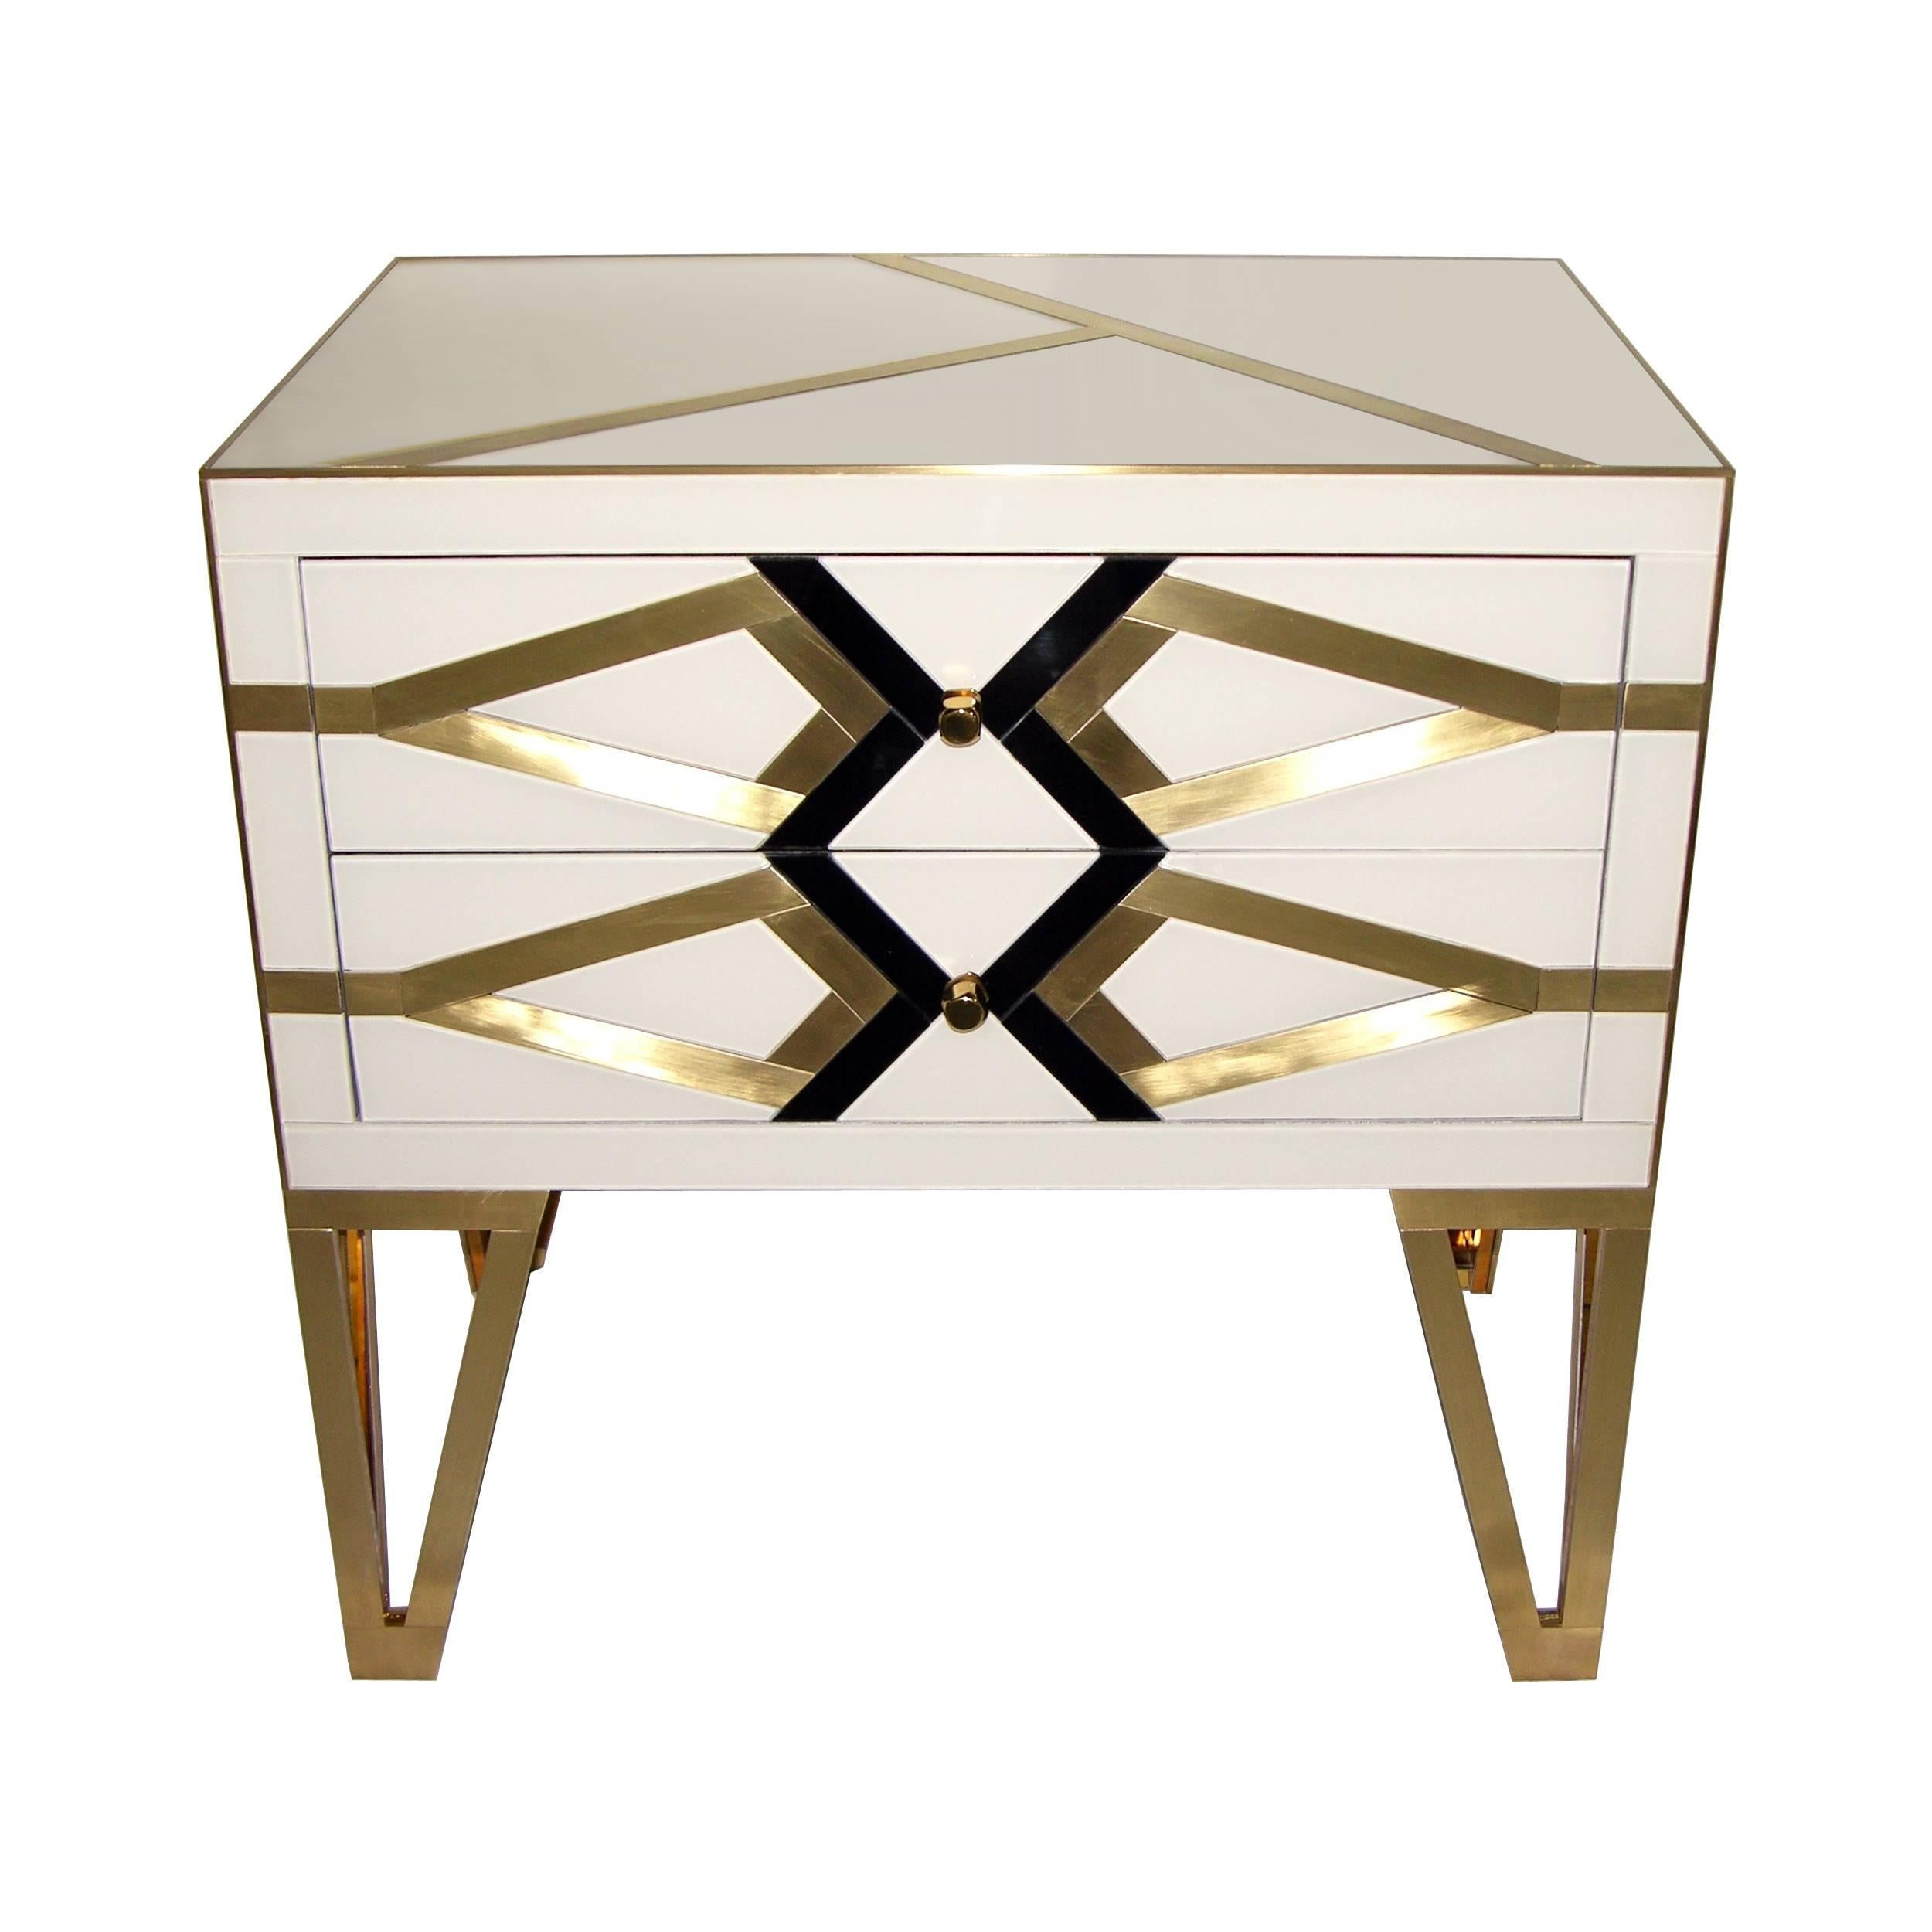 Italian pair of two-drawer commodes or nightstands, one-of-a-kind contemporary work, entirely handmade showing high quality and elegance of execution: The surround in ivory white is decorated with a geometrical abstract pattern in black glass and